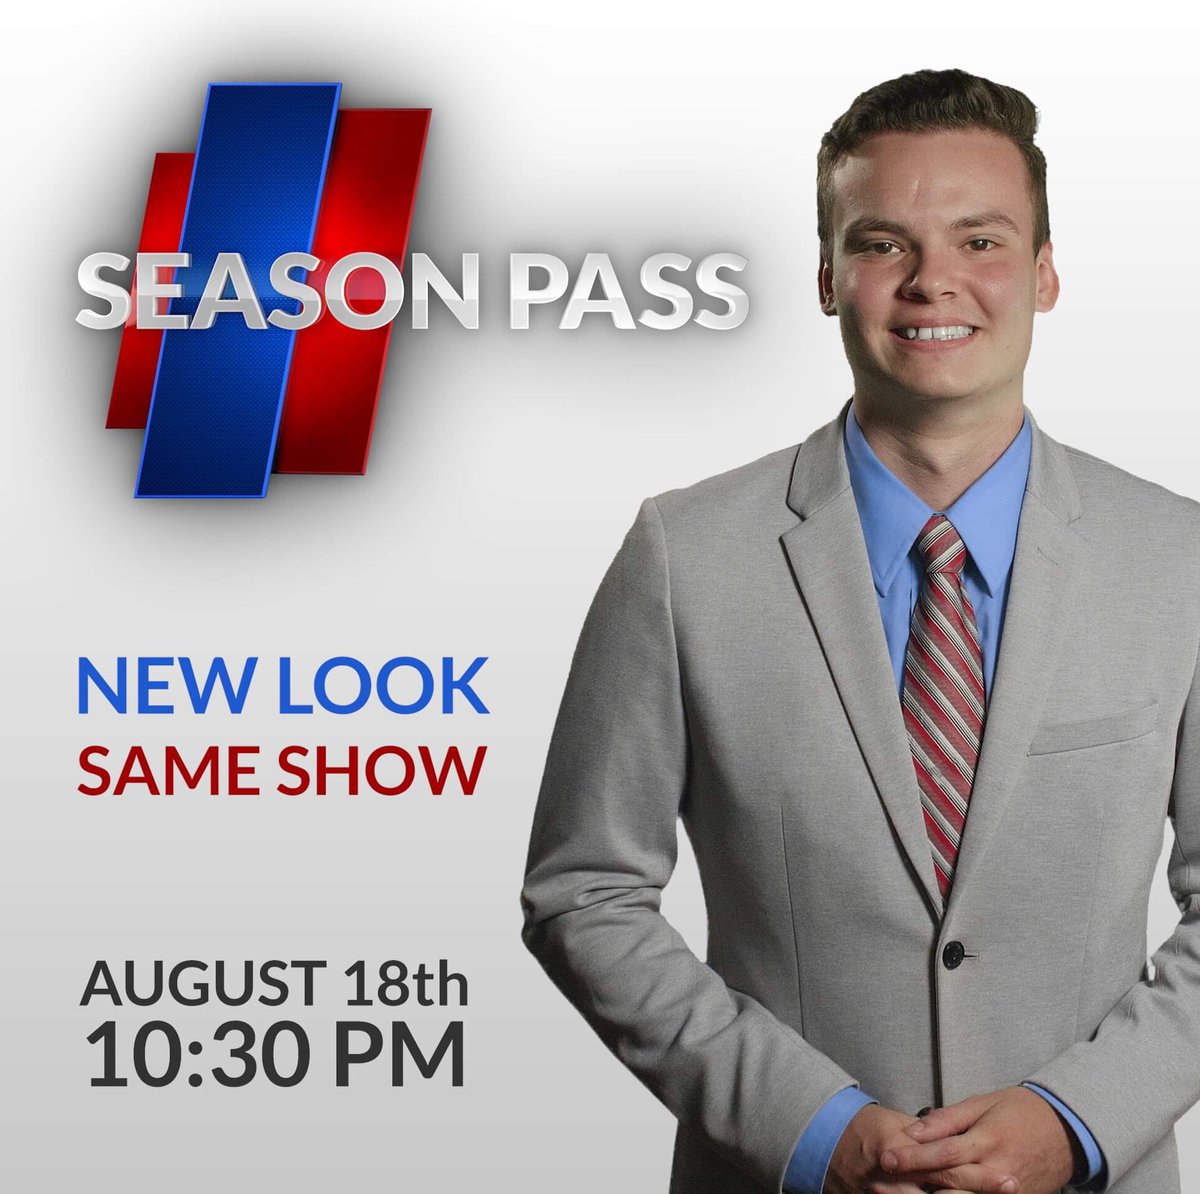 REMINDER: Season Pass premiers tonight after the 10 o’clock KLST News. Set a reminder to tune in and catch up on what’s happening in sports around the #ConchoValley.